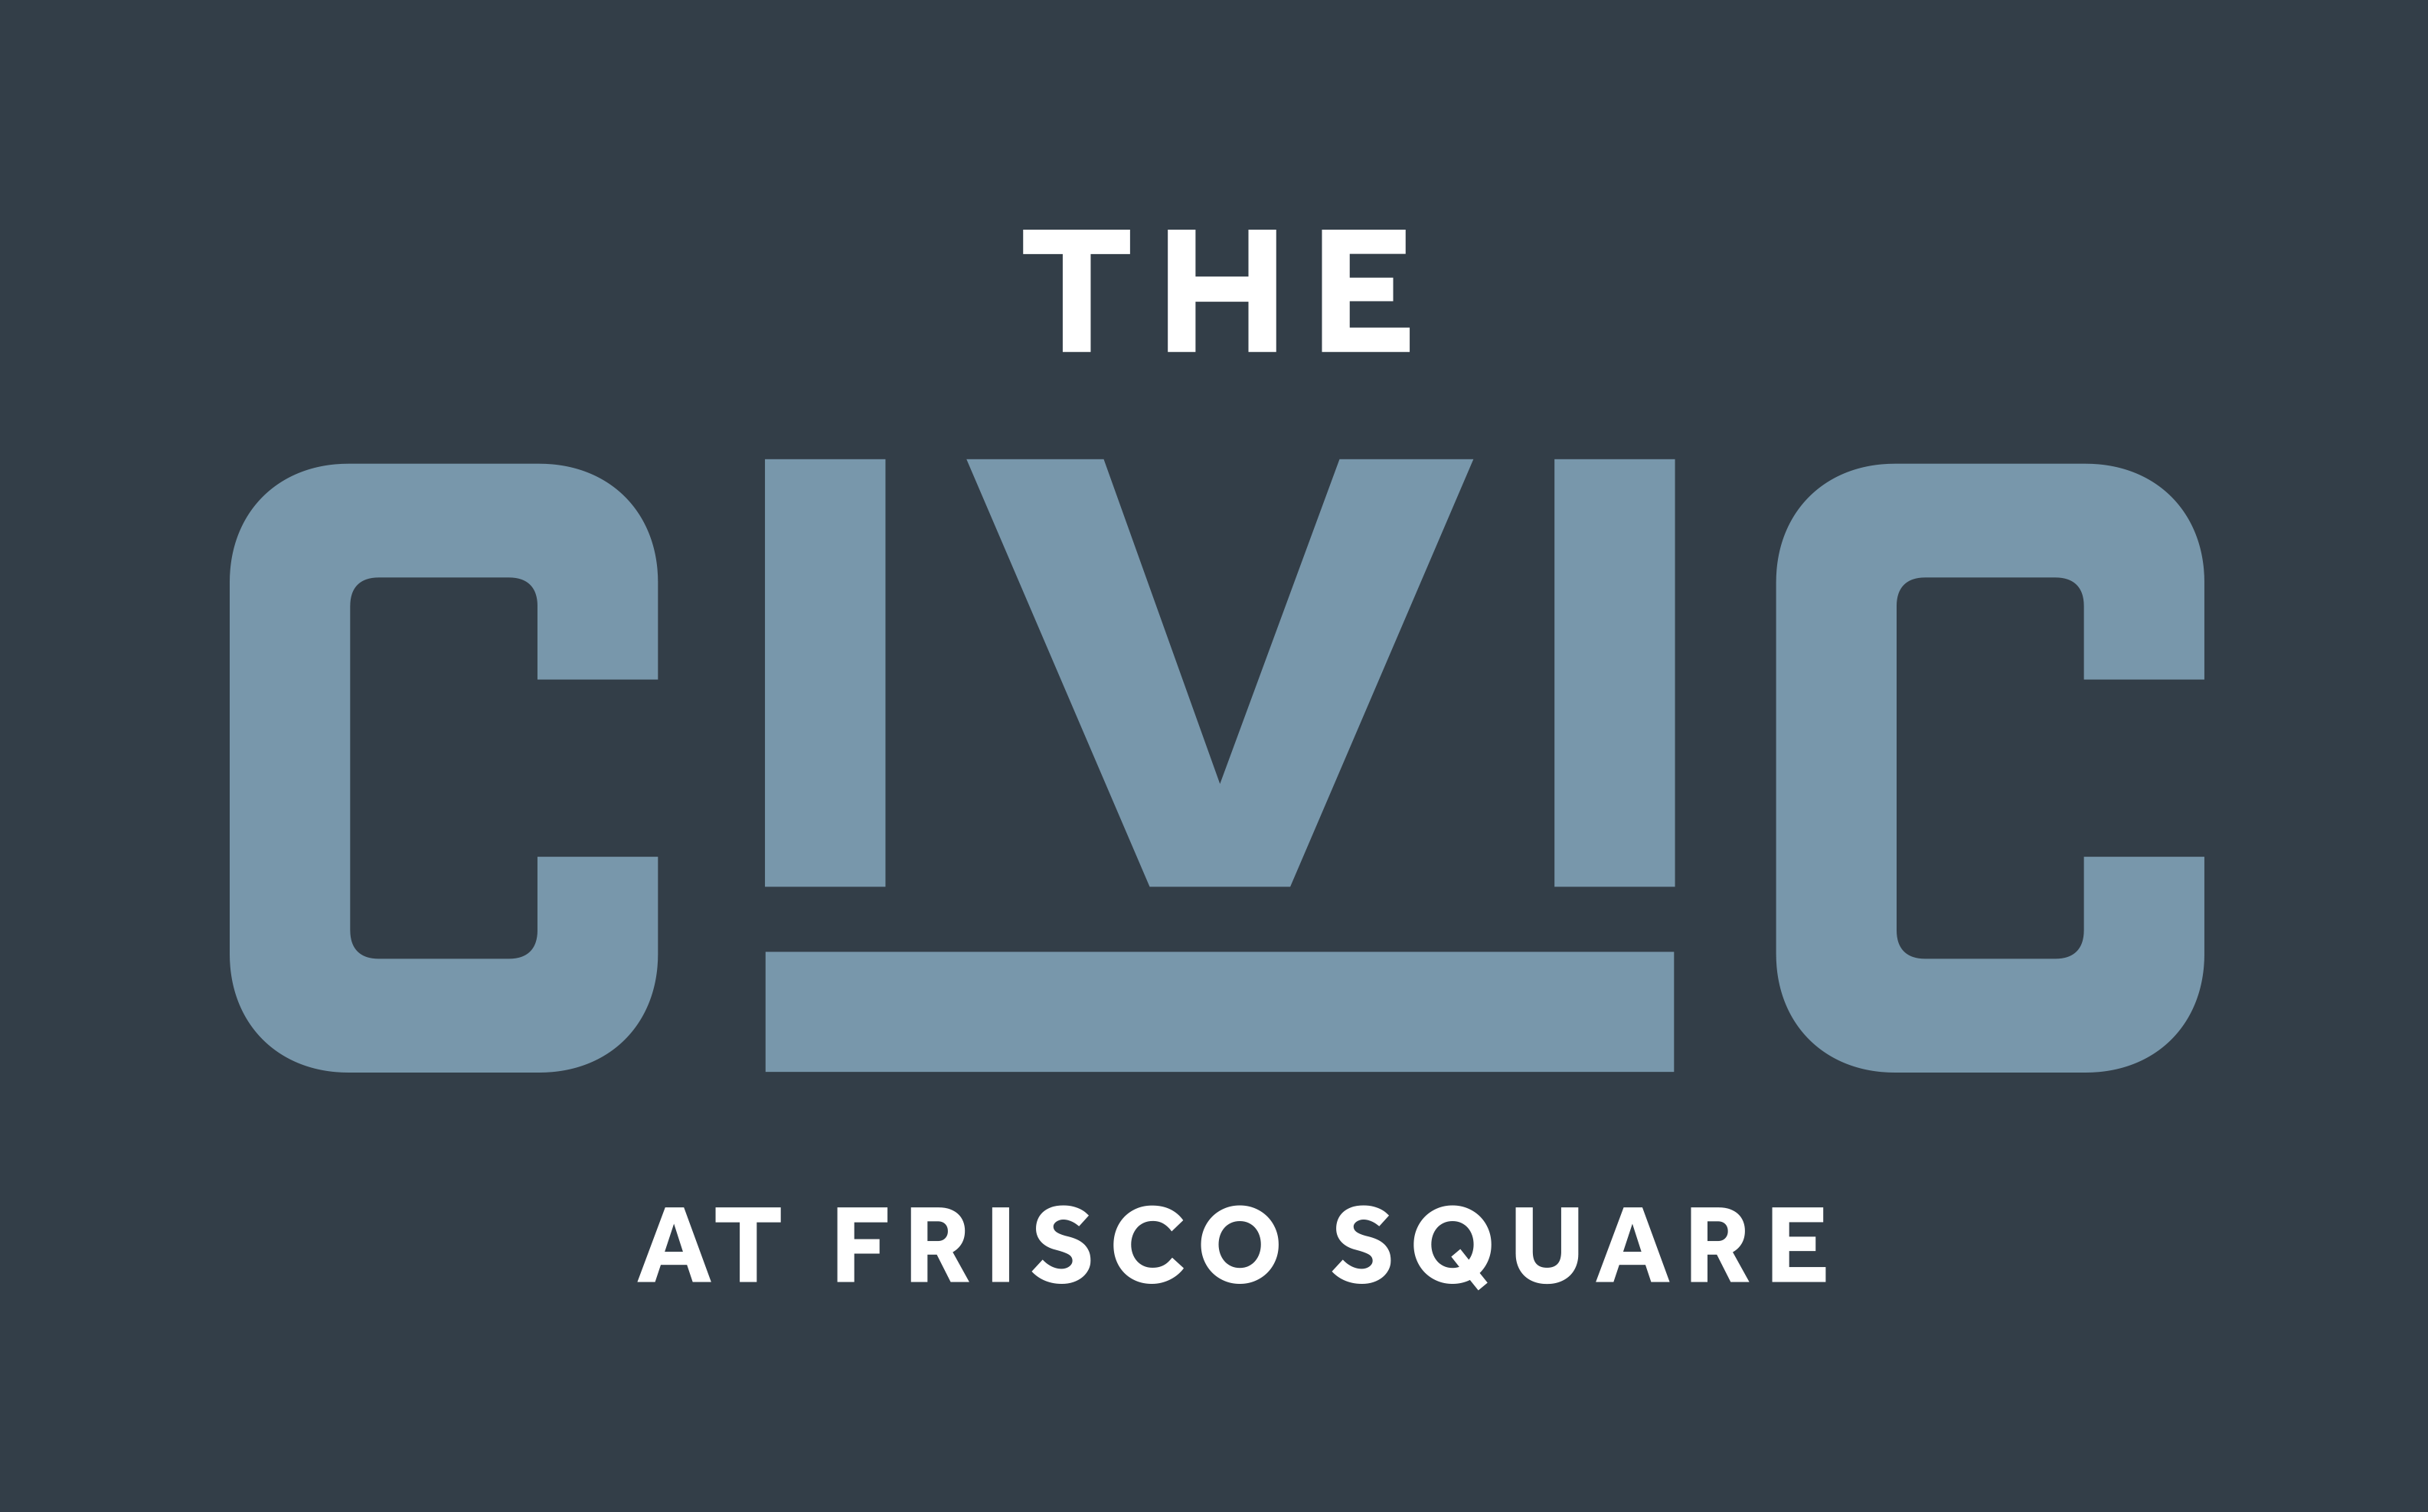 The Civic at Frisco Square